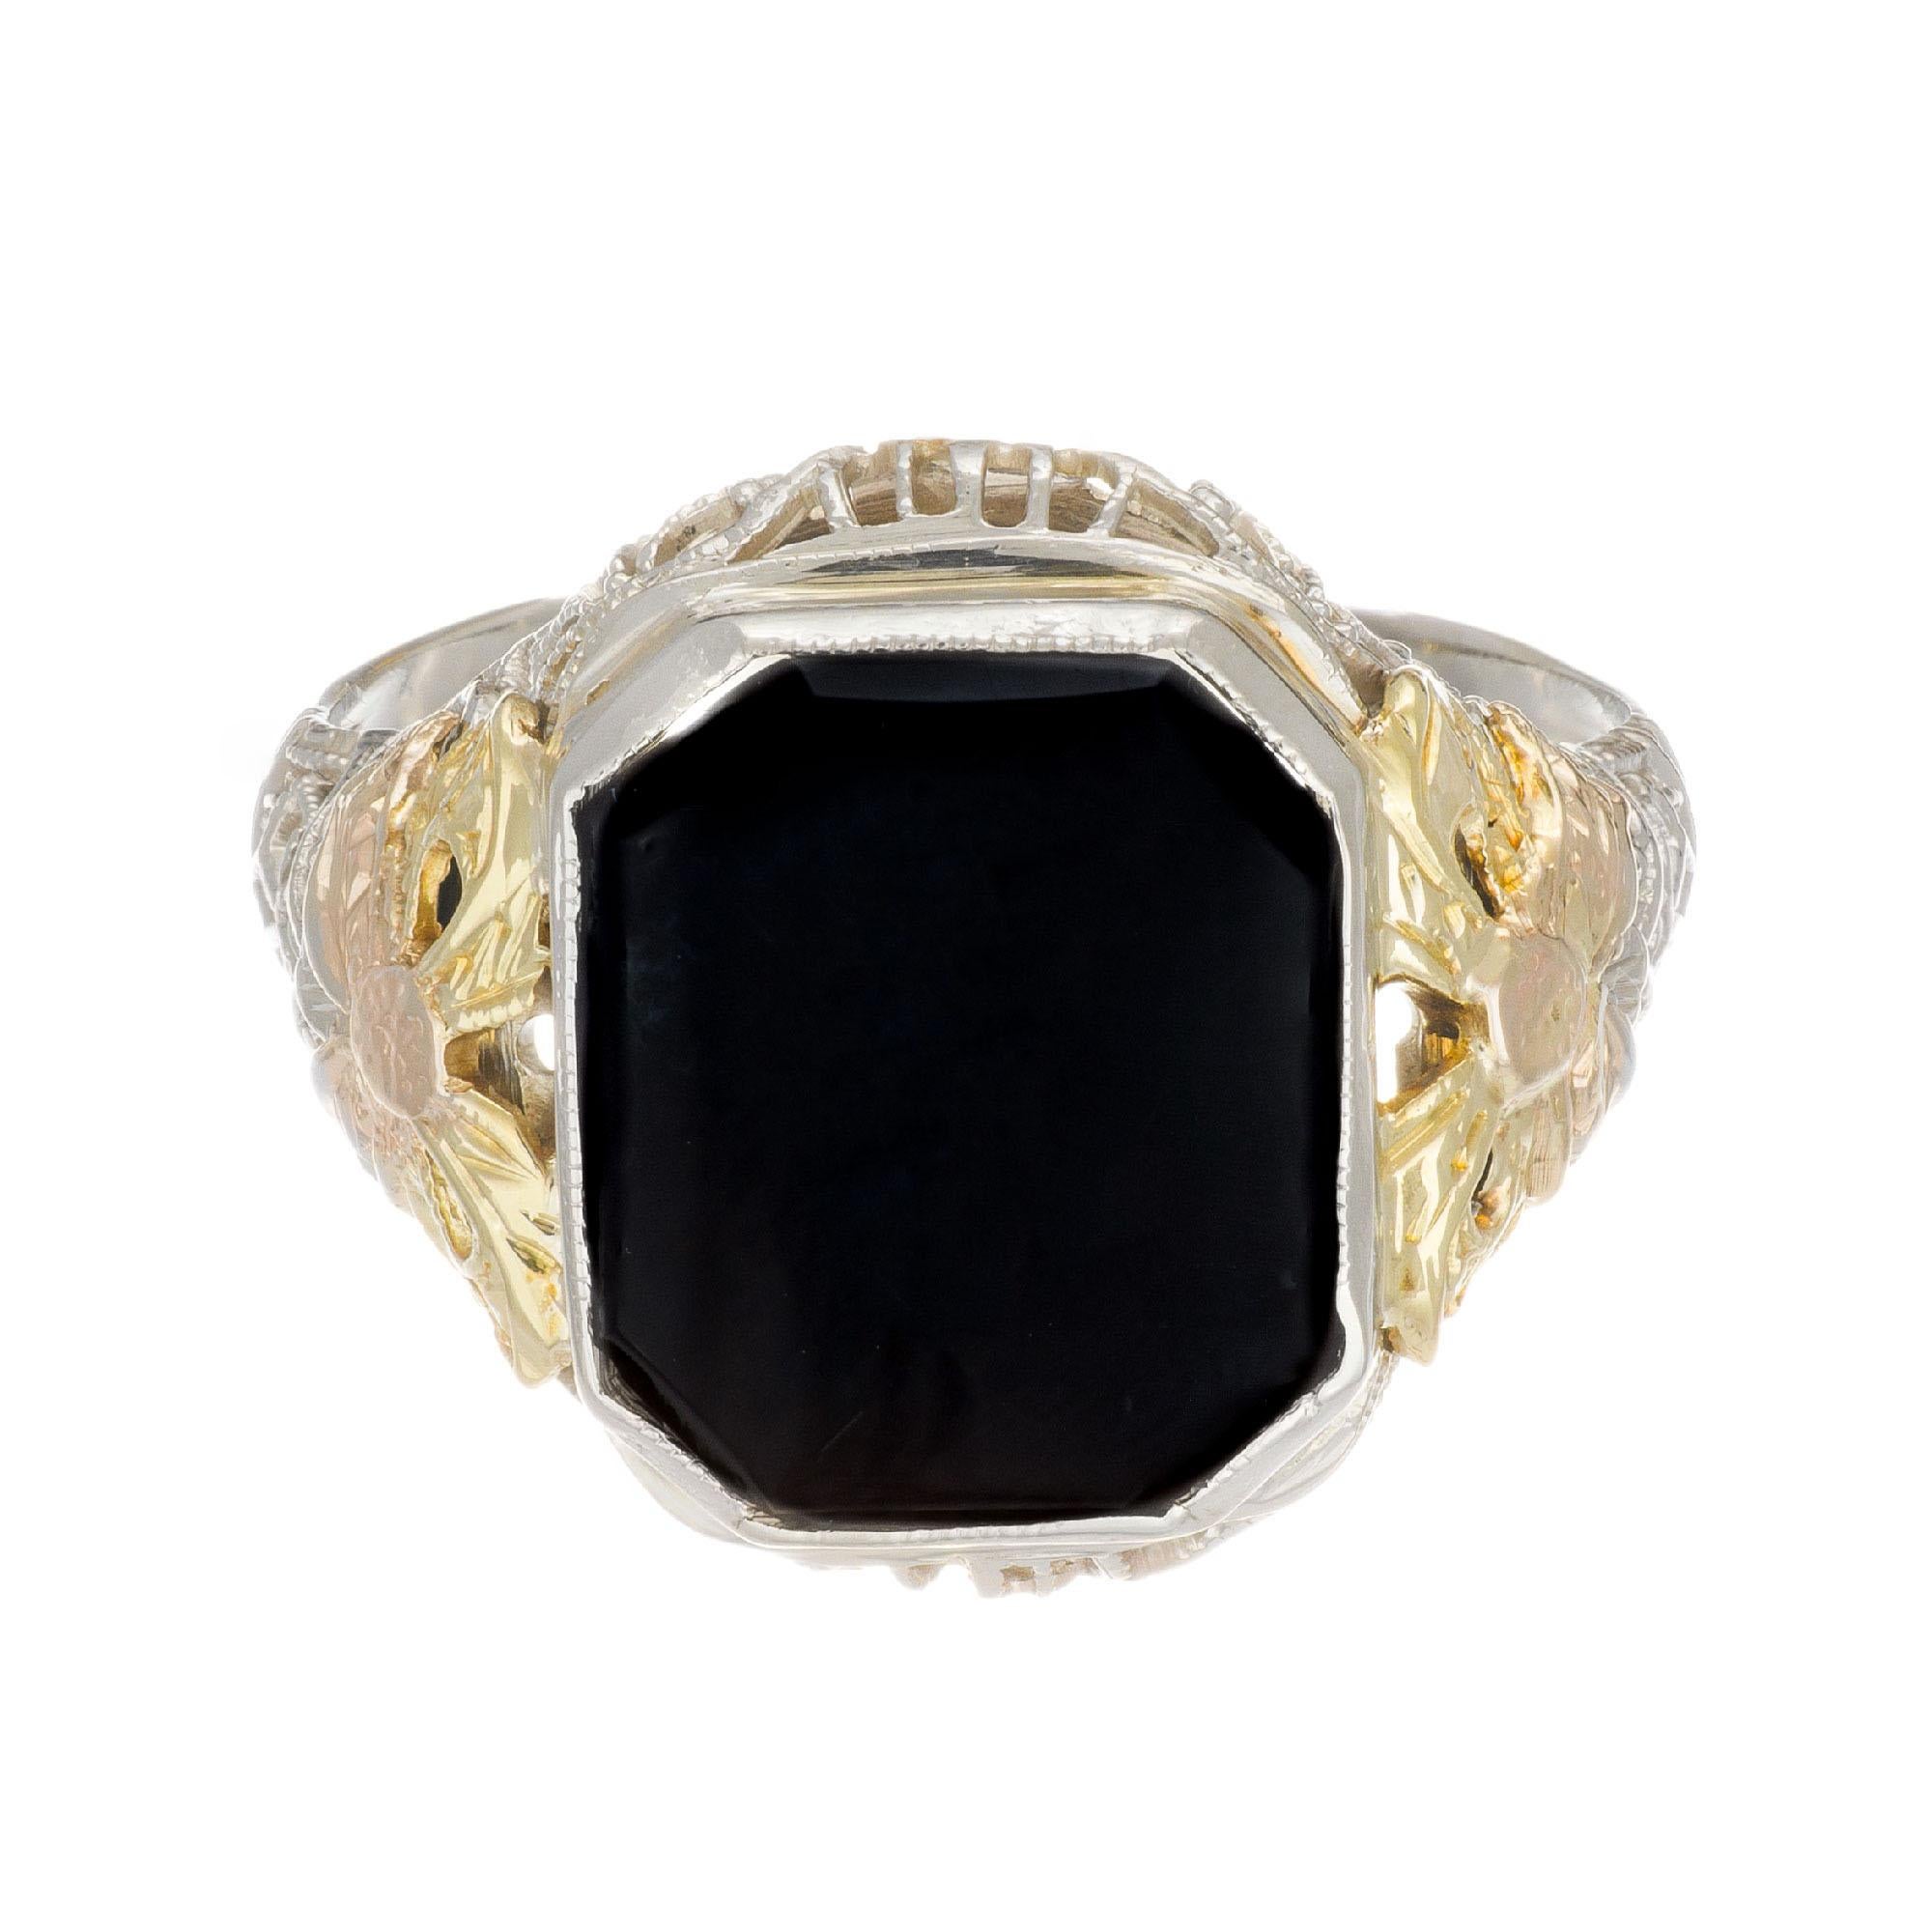 Vintage Art Deco filigree octagonal onyx ring. Set in white gold with yellow and rose gold bow designs on each side. Filigree top and bottoms with hand engraved shank. Circa 1920's.

1 octagonal black Onyx 12 x 10mm, opaque
Size 7.75 and